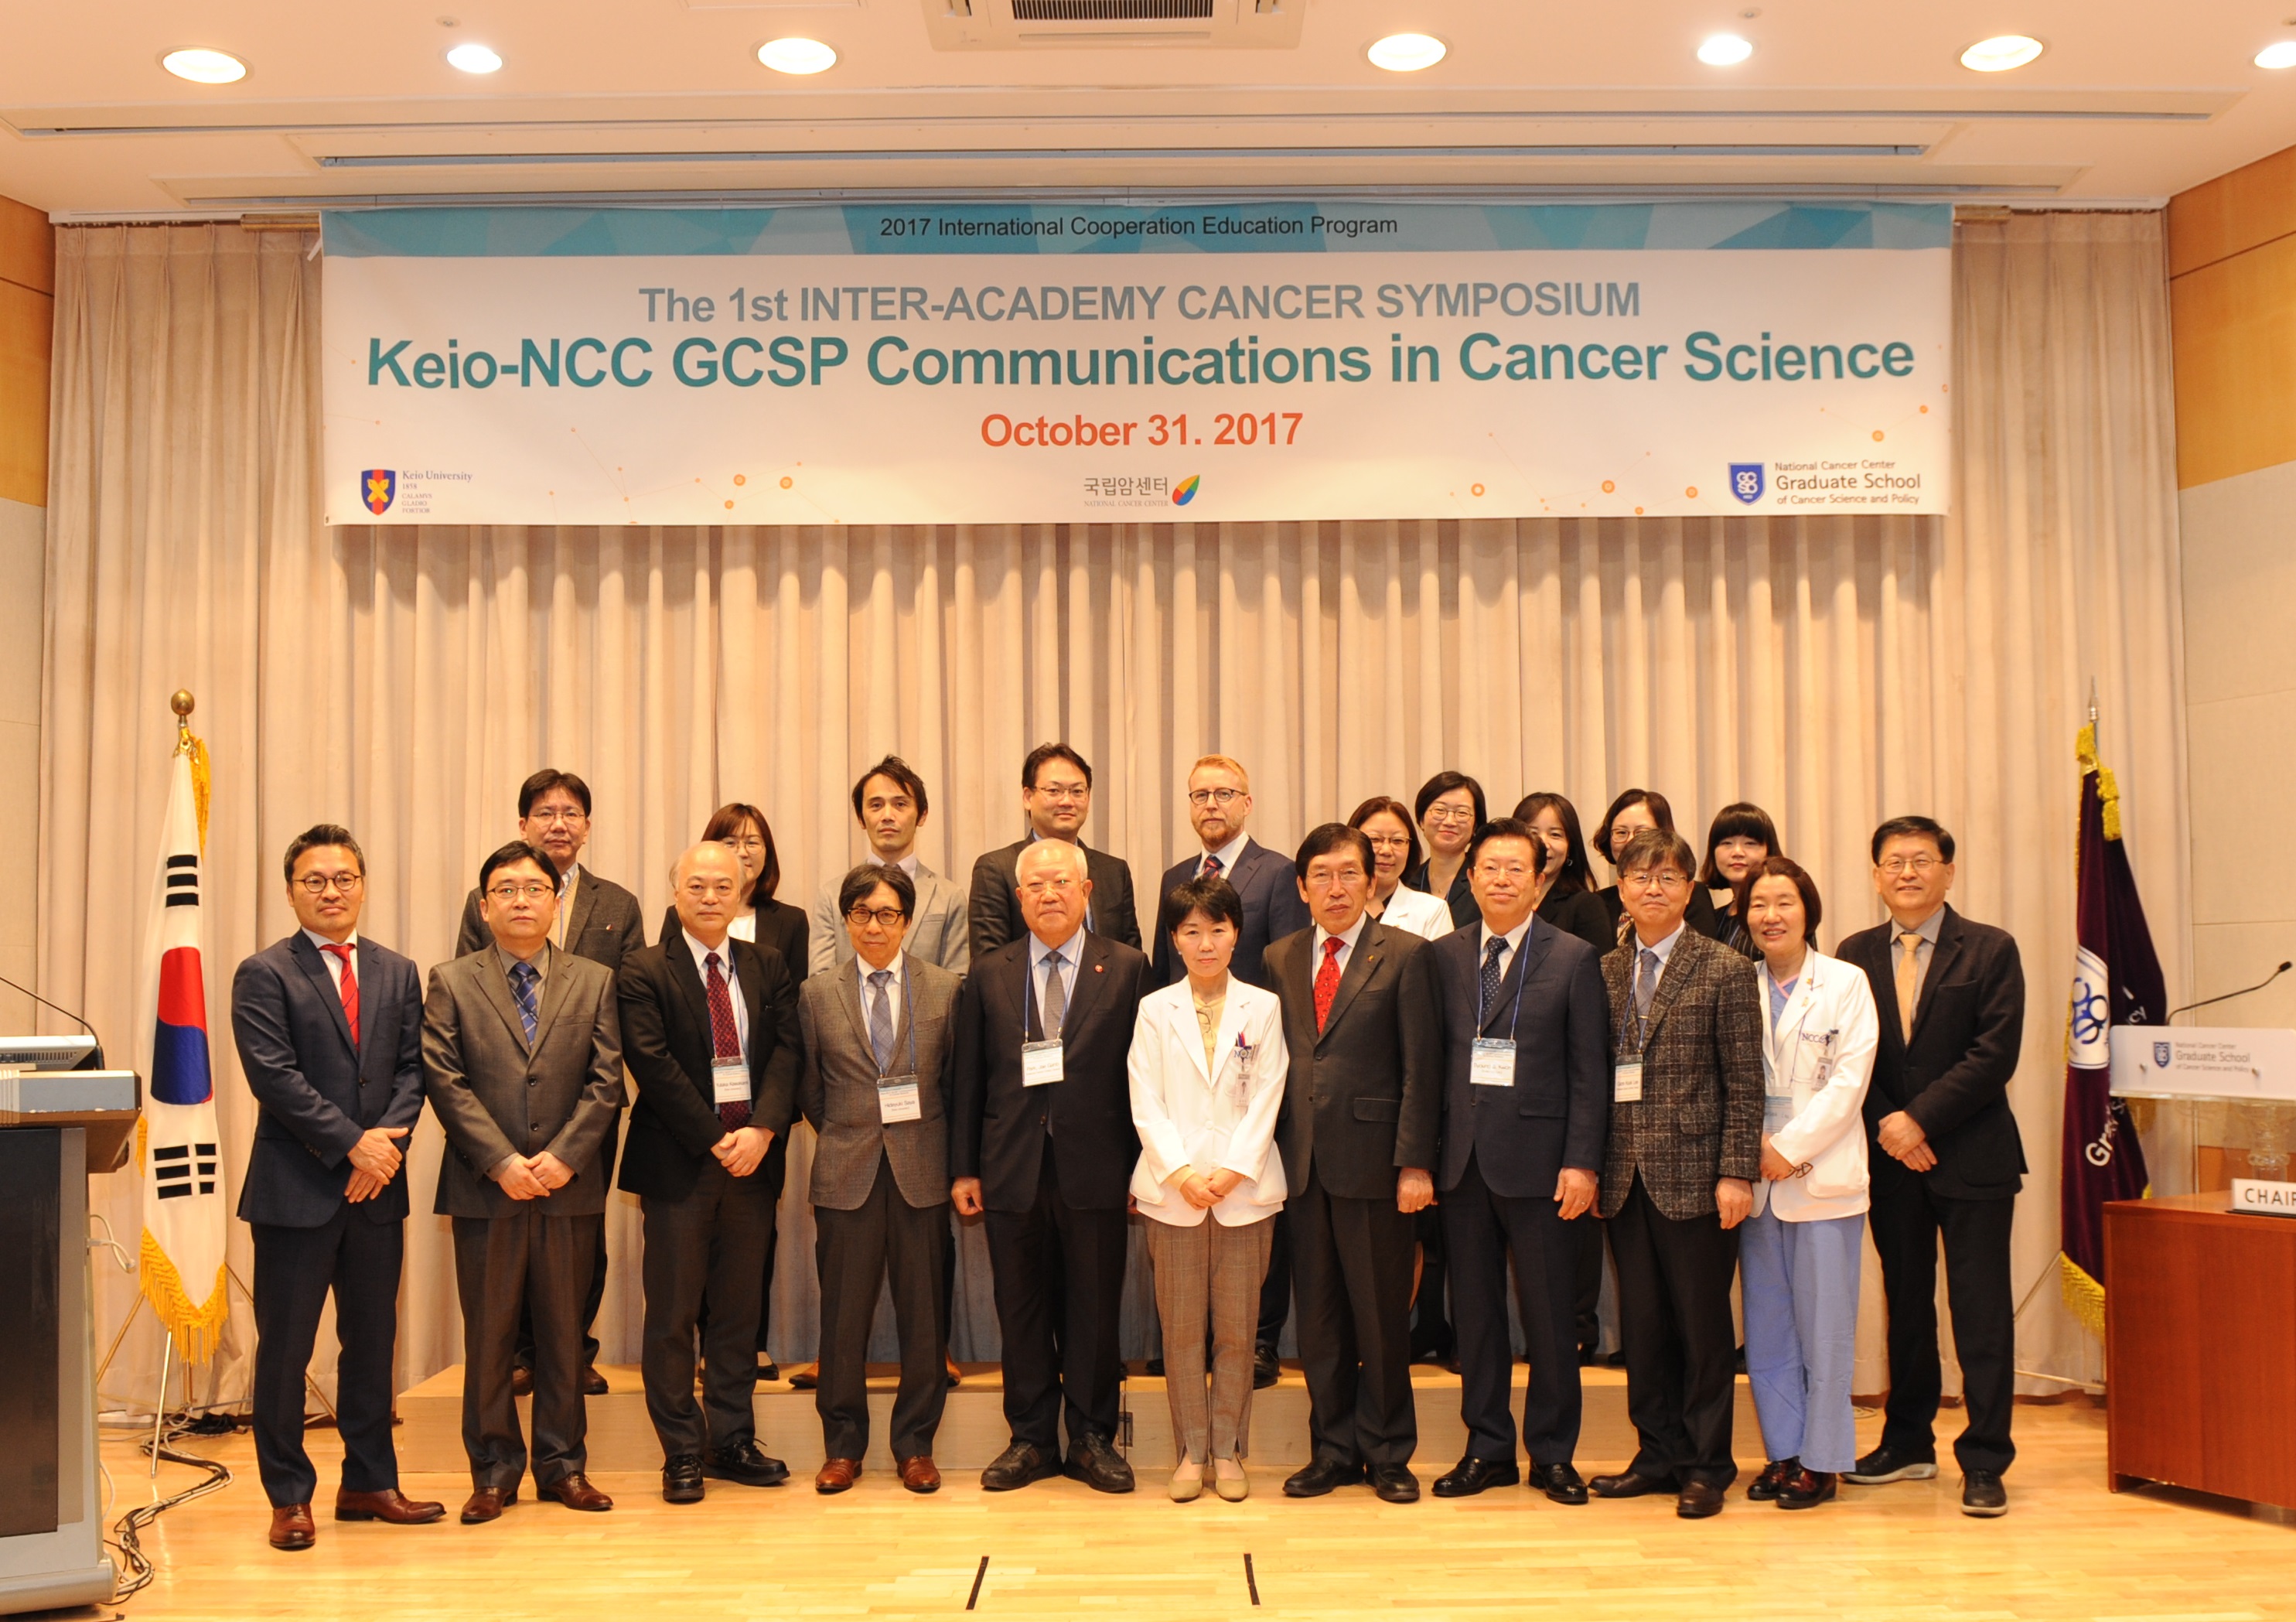 Faculty members of the National Cancer Center International Cancer Graduate University (Jae-Gap Park, Acting Acting President Joo-Young Kim, etc.) and speakers (Hideyuki Saya, Yutaka Kawakami, etc.) attended the 1st Inter Academy Cancer Symposium held in the 8th floor of the examination building. photo taken with